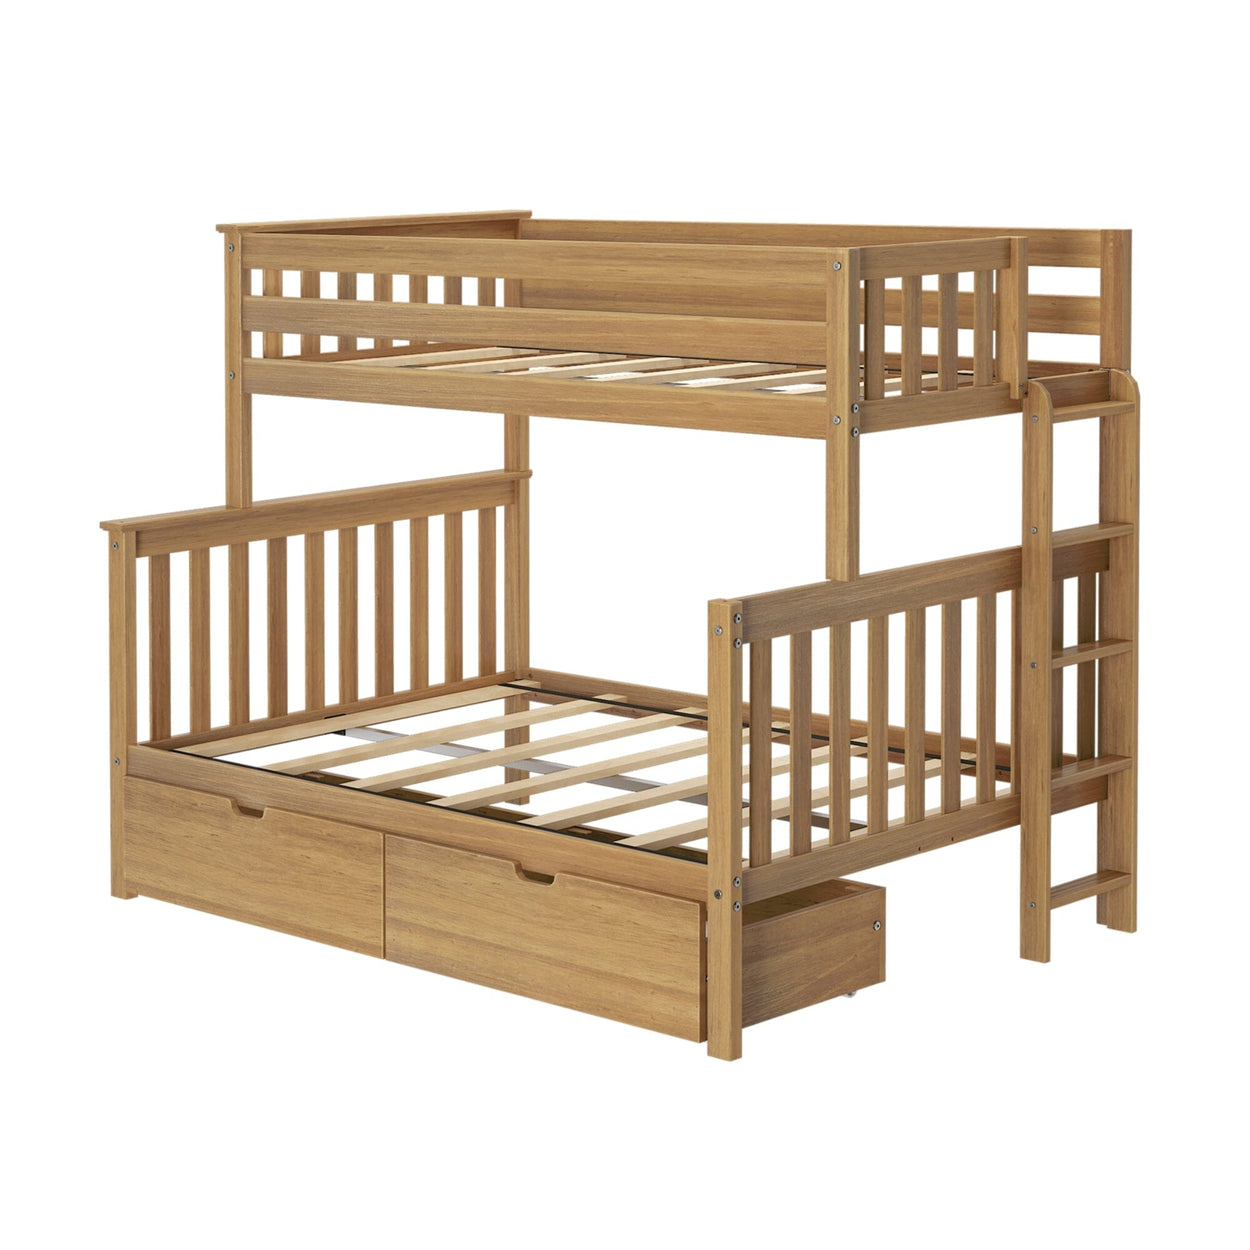 187335-007 : Bunk Beds Twin over Full Bunk Bed with Ladder on End and Storage Drawers, Pecan